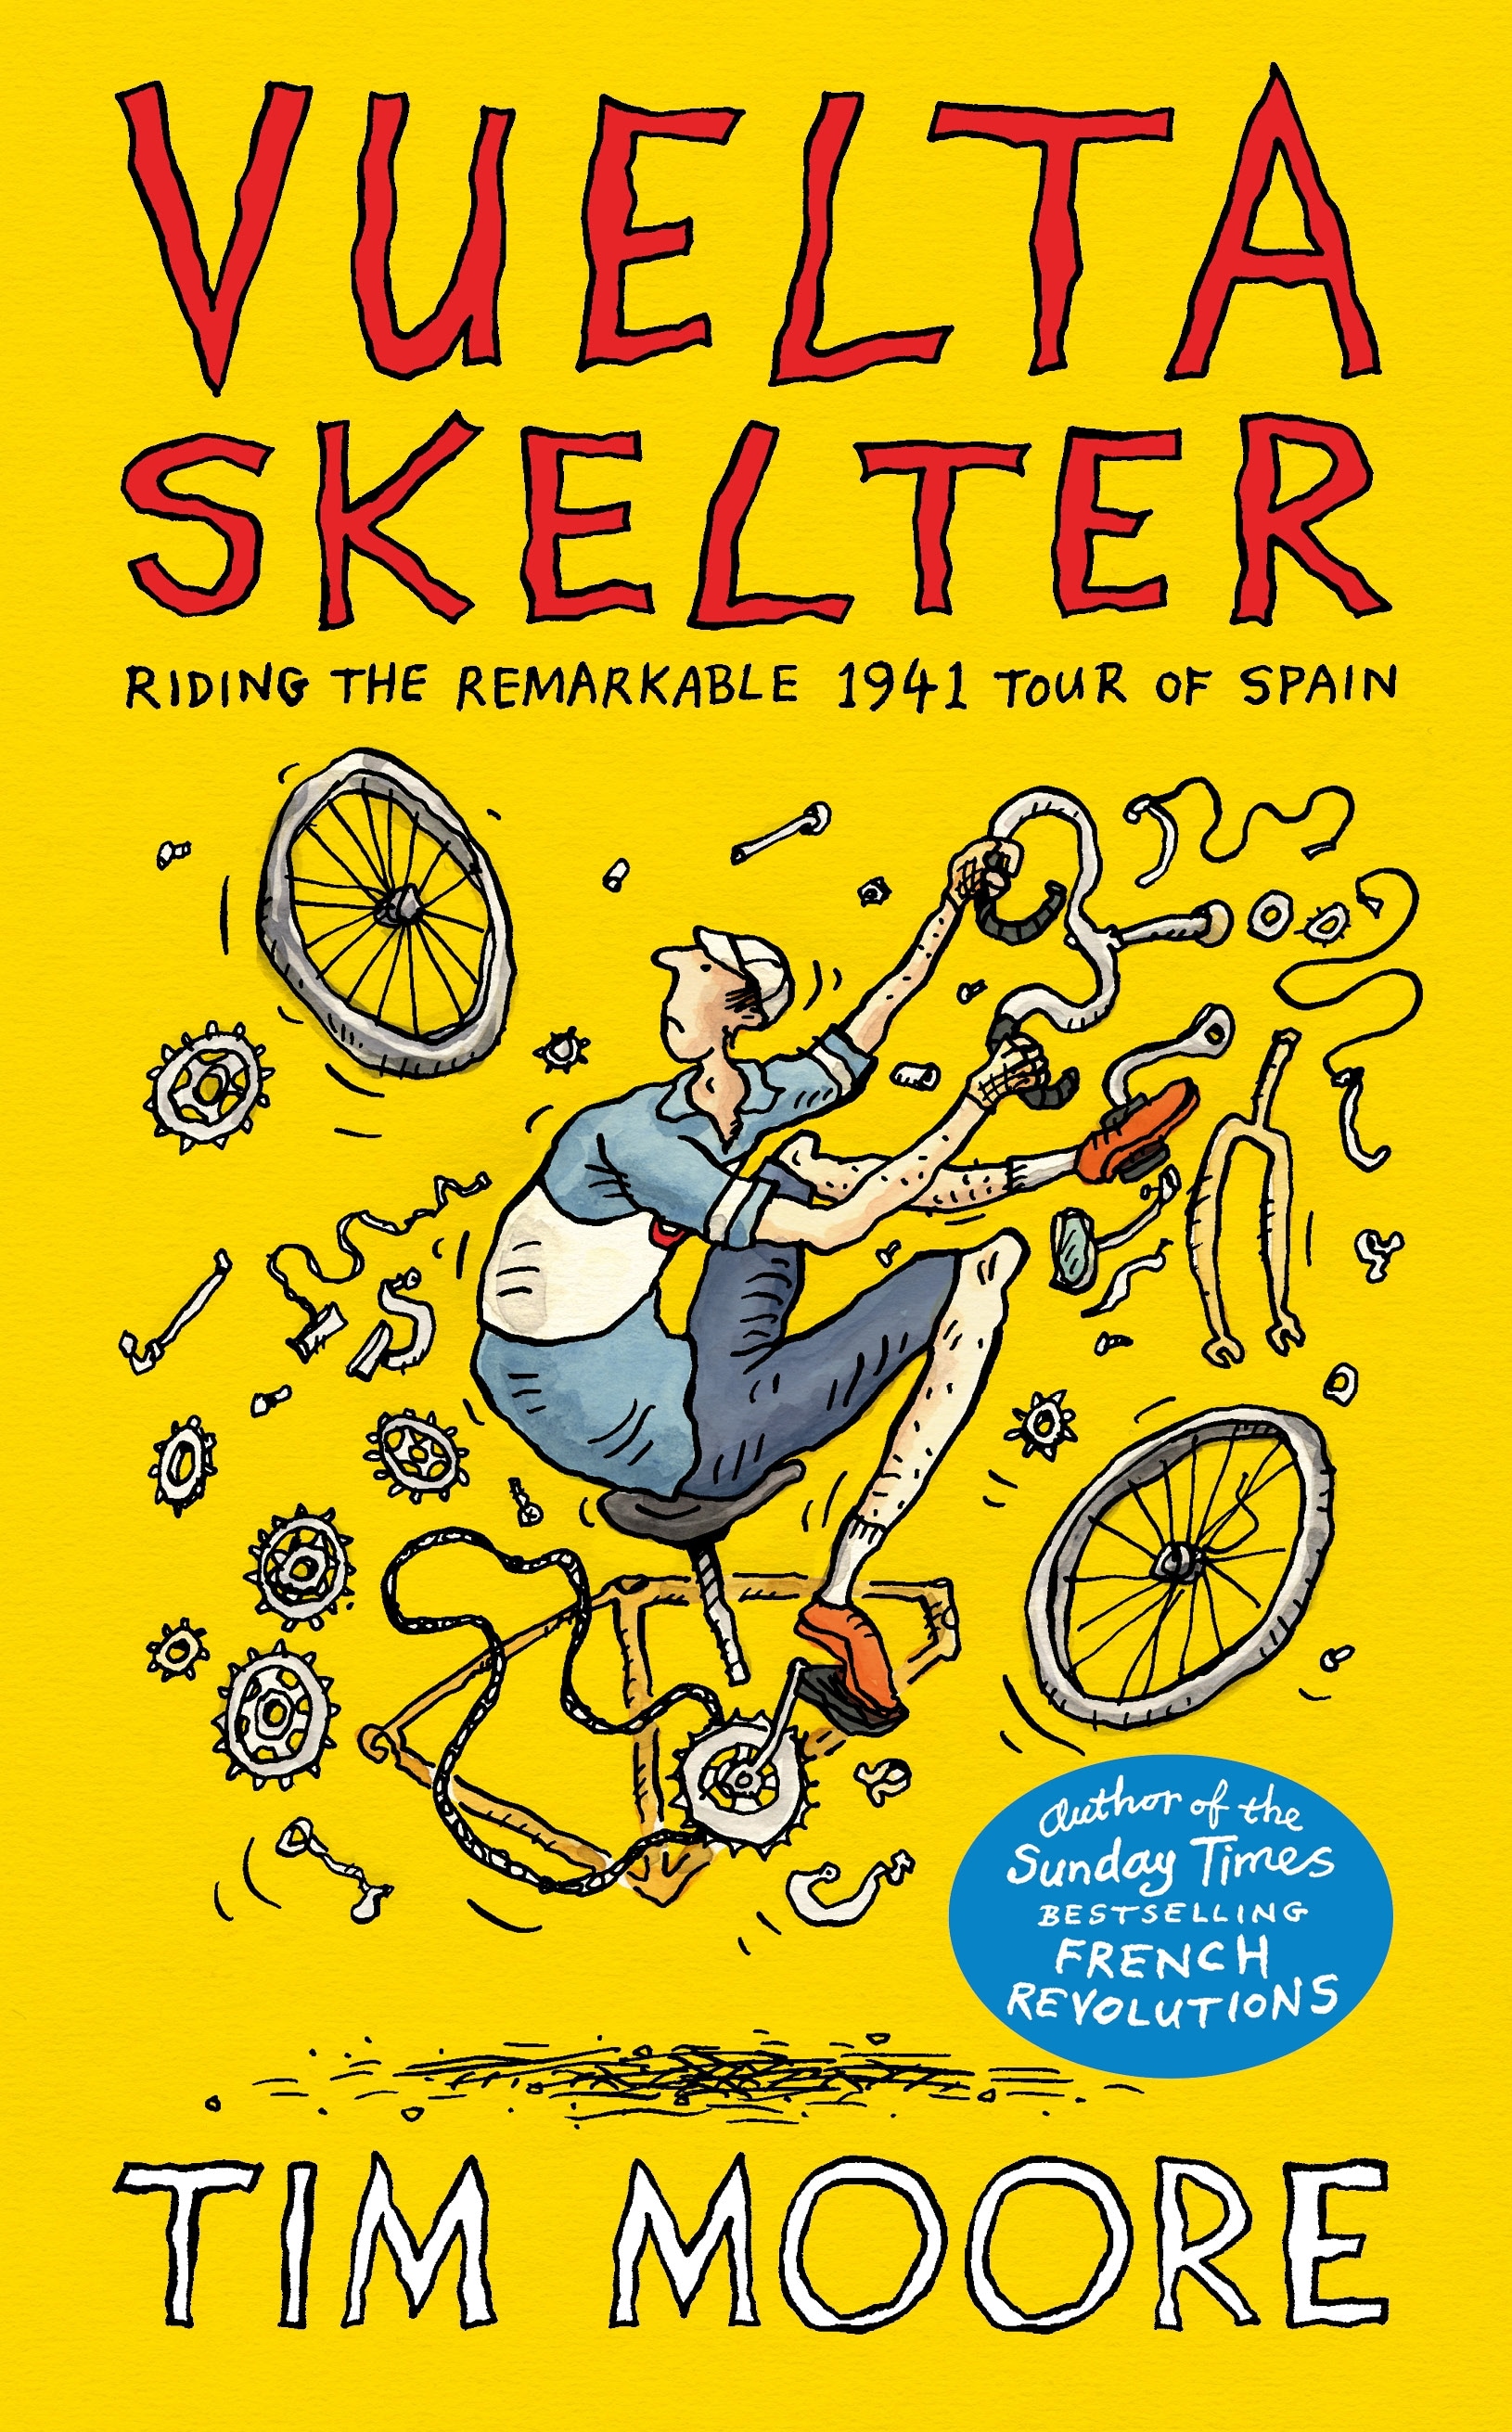 Book “Vuelta Skelter” by Tim Moore — August 12, 2021